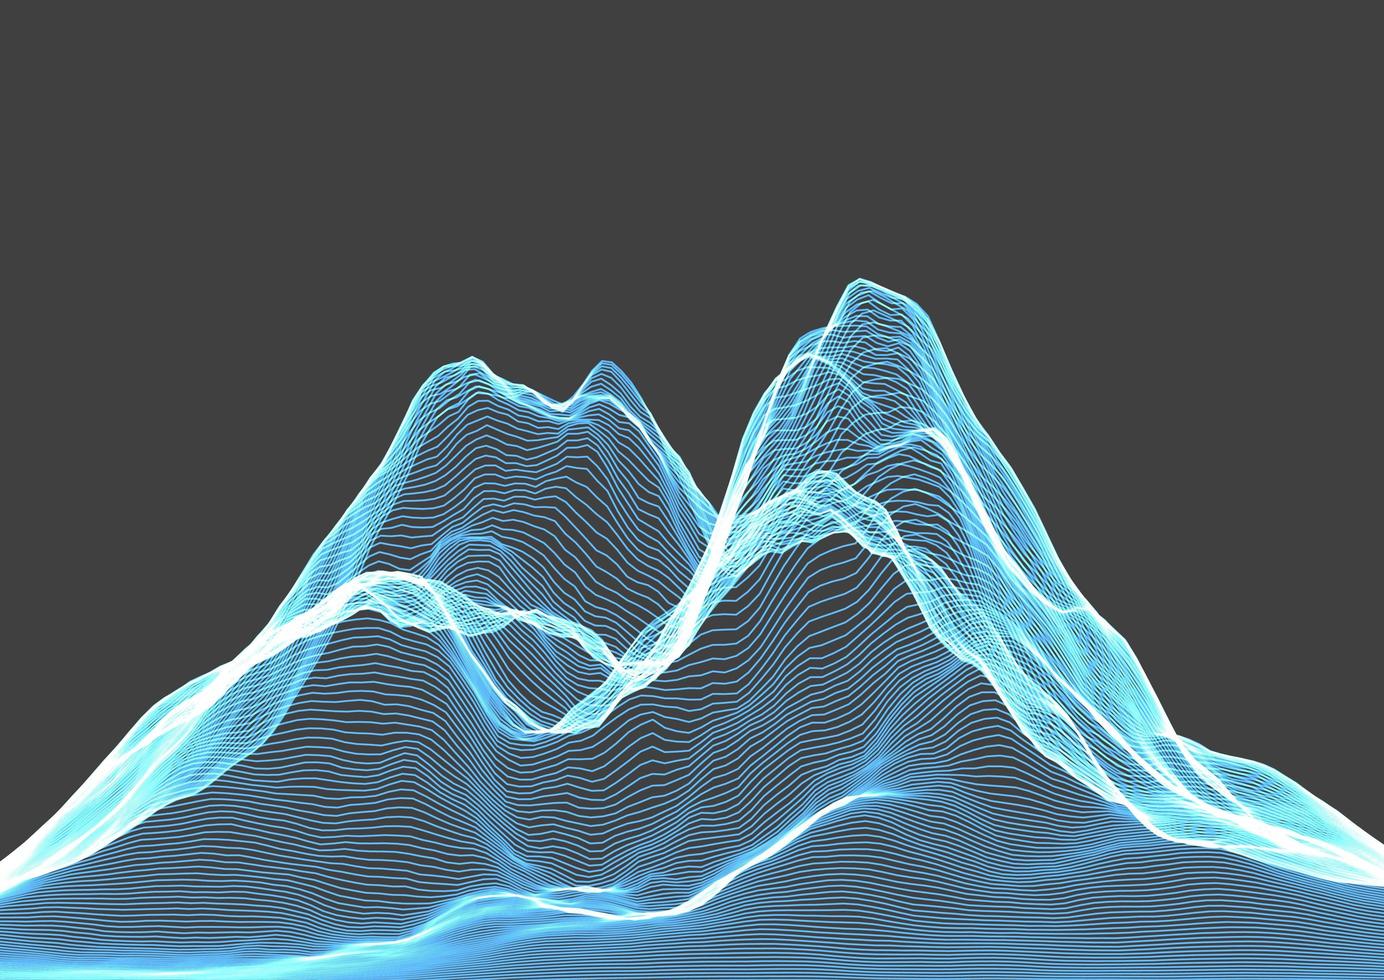 Blue wireframe mountain landscape vector